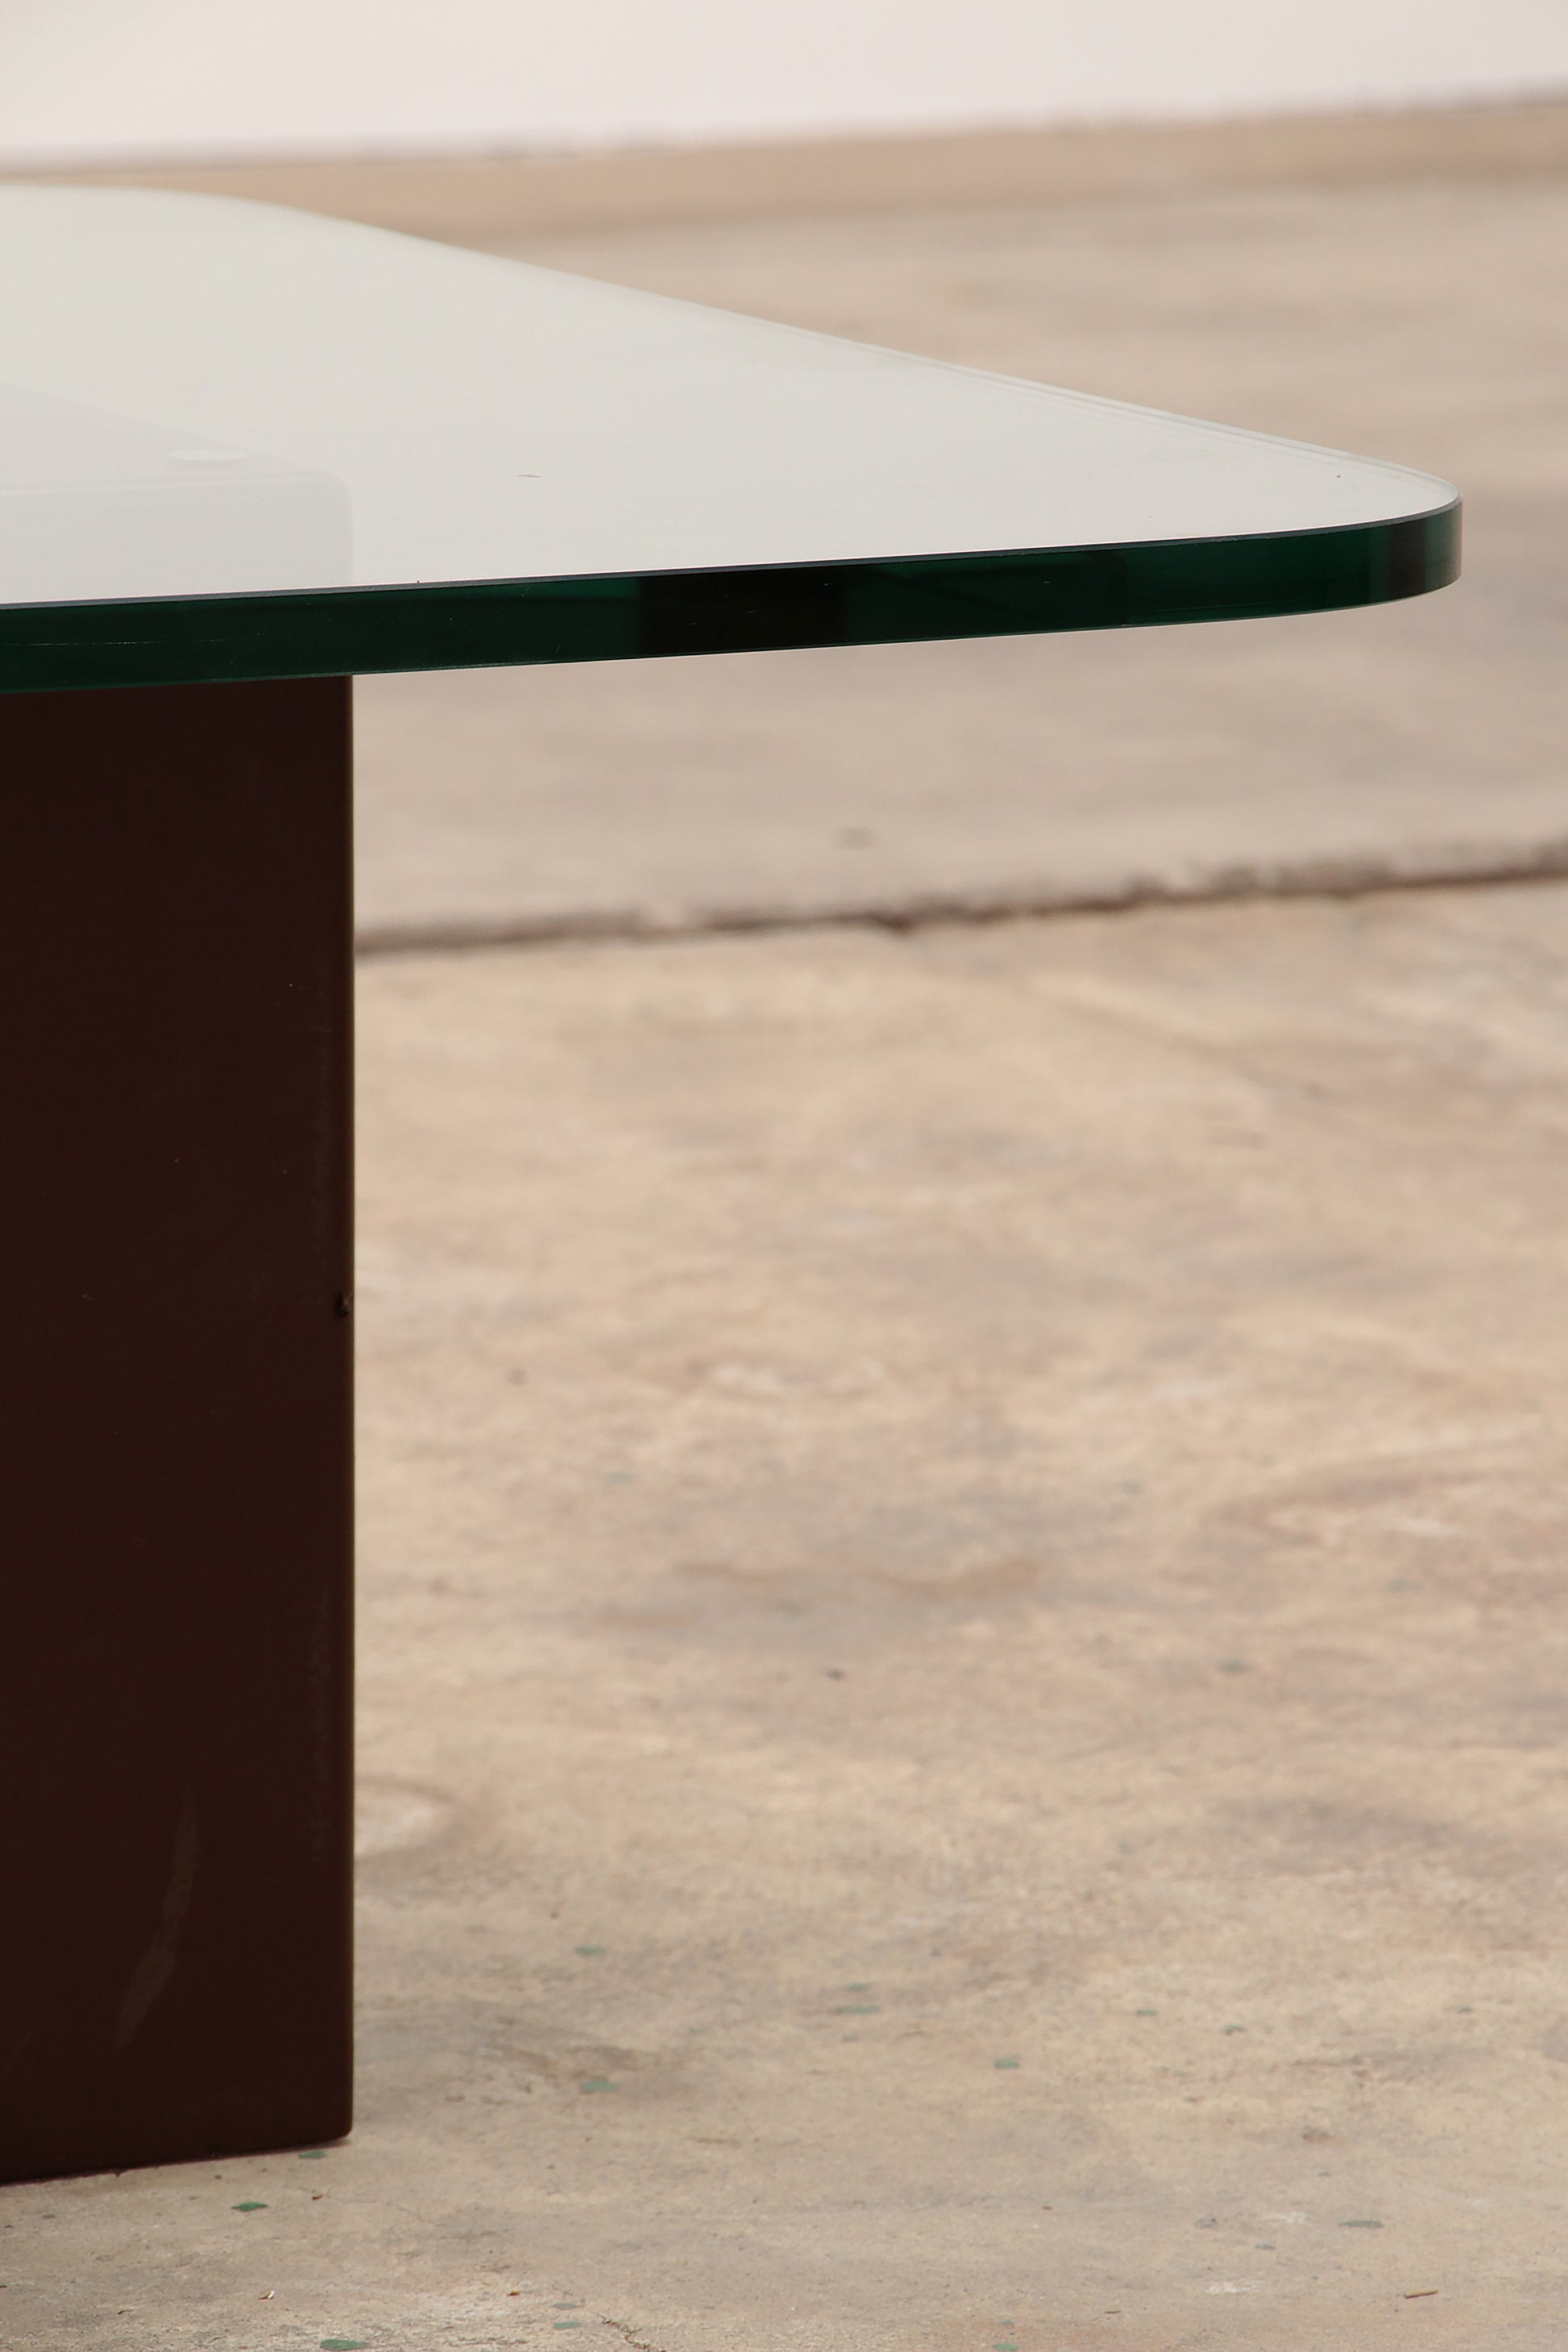 Tito Agnoli for Matteo Grassi Leather coffee table and chairs.